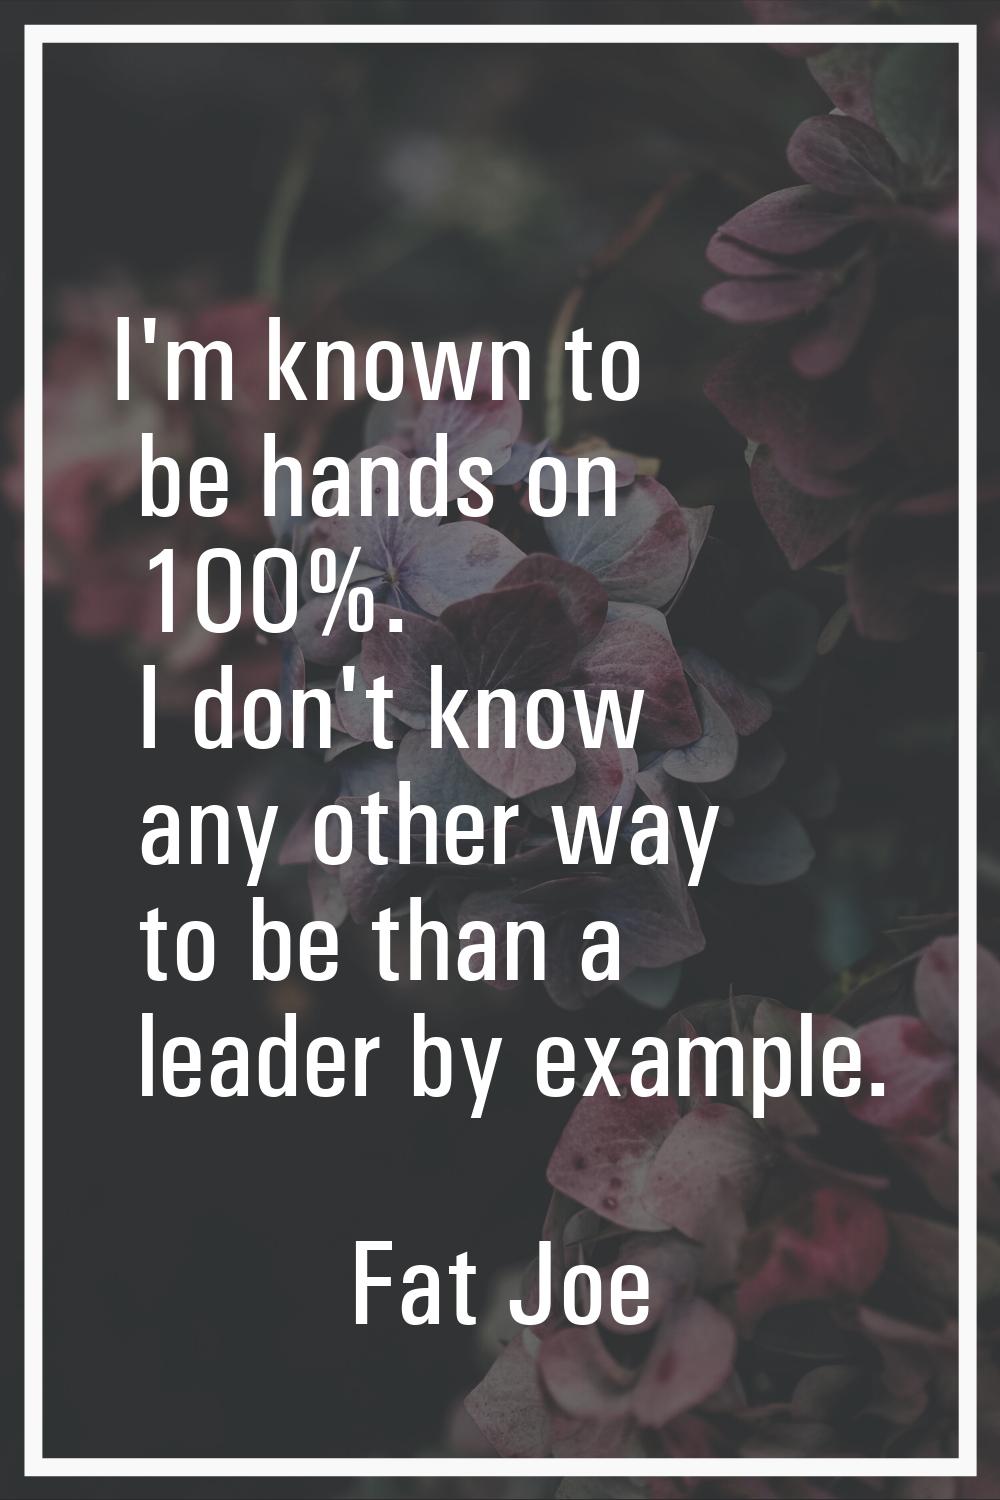 I'm known to be hands on 100%. I don't know any other way to be than a leader by example.